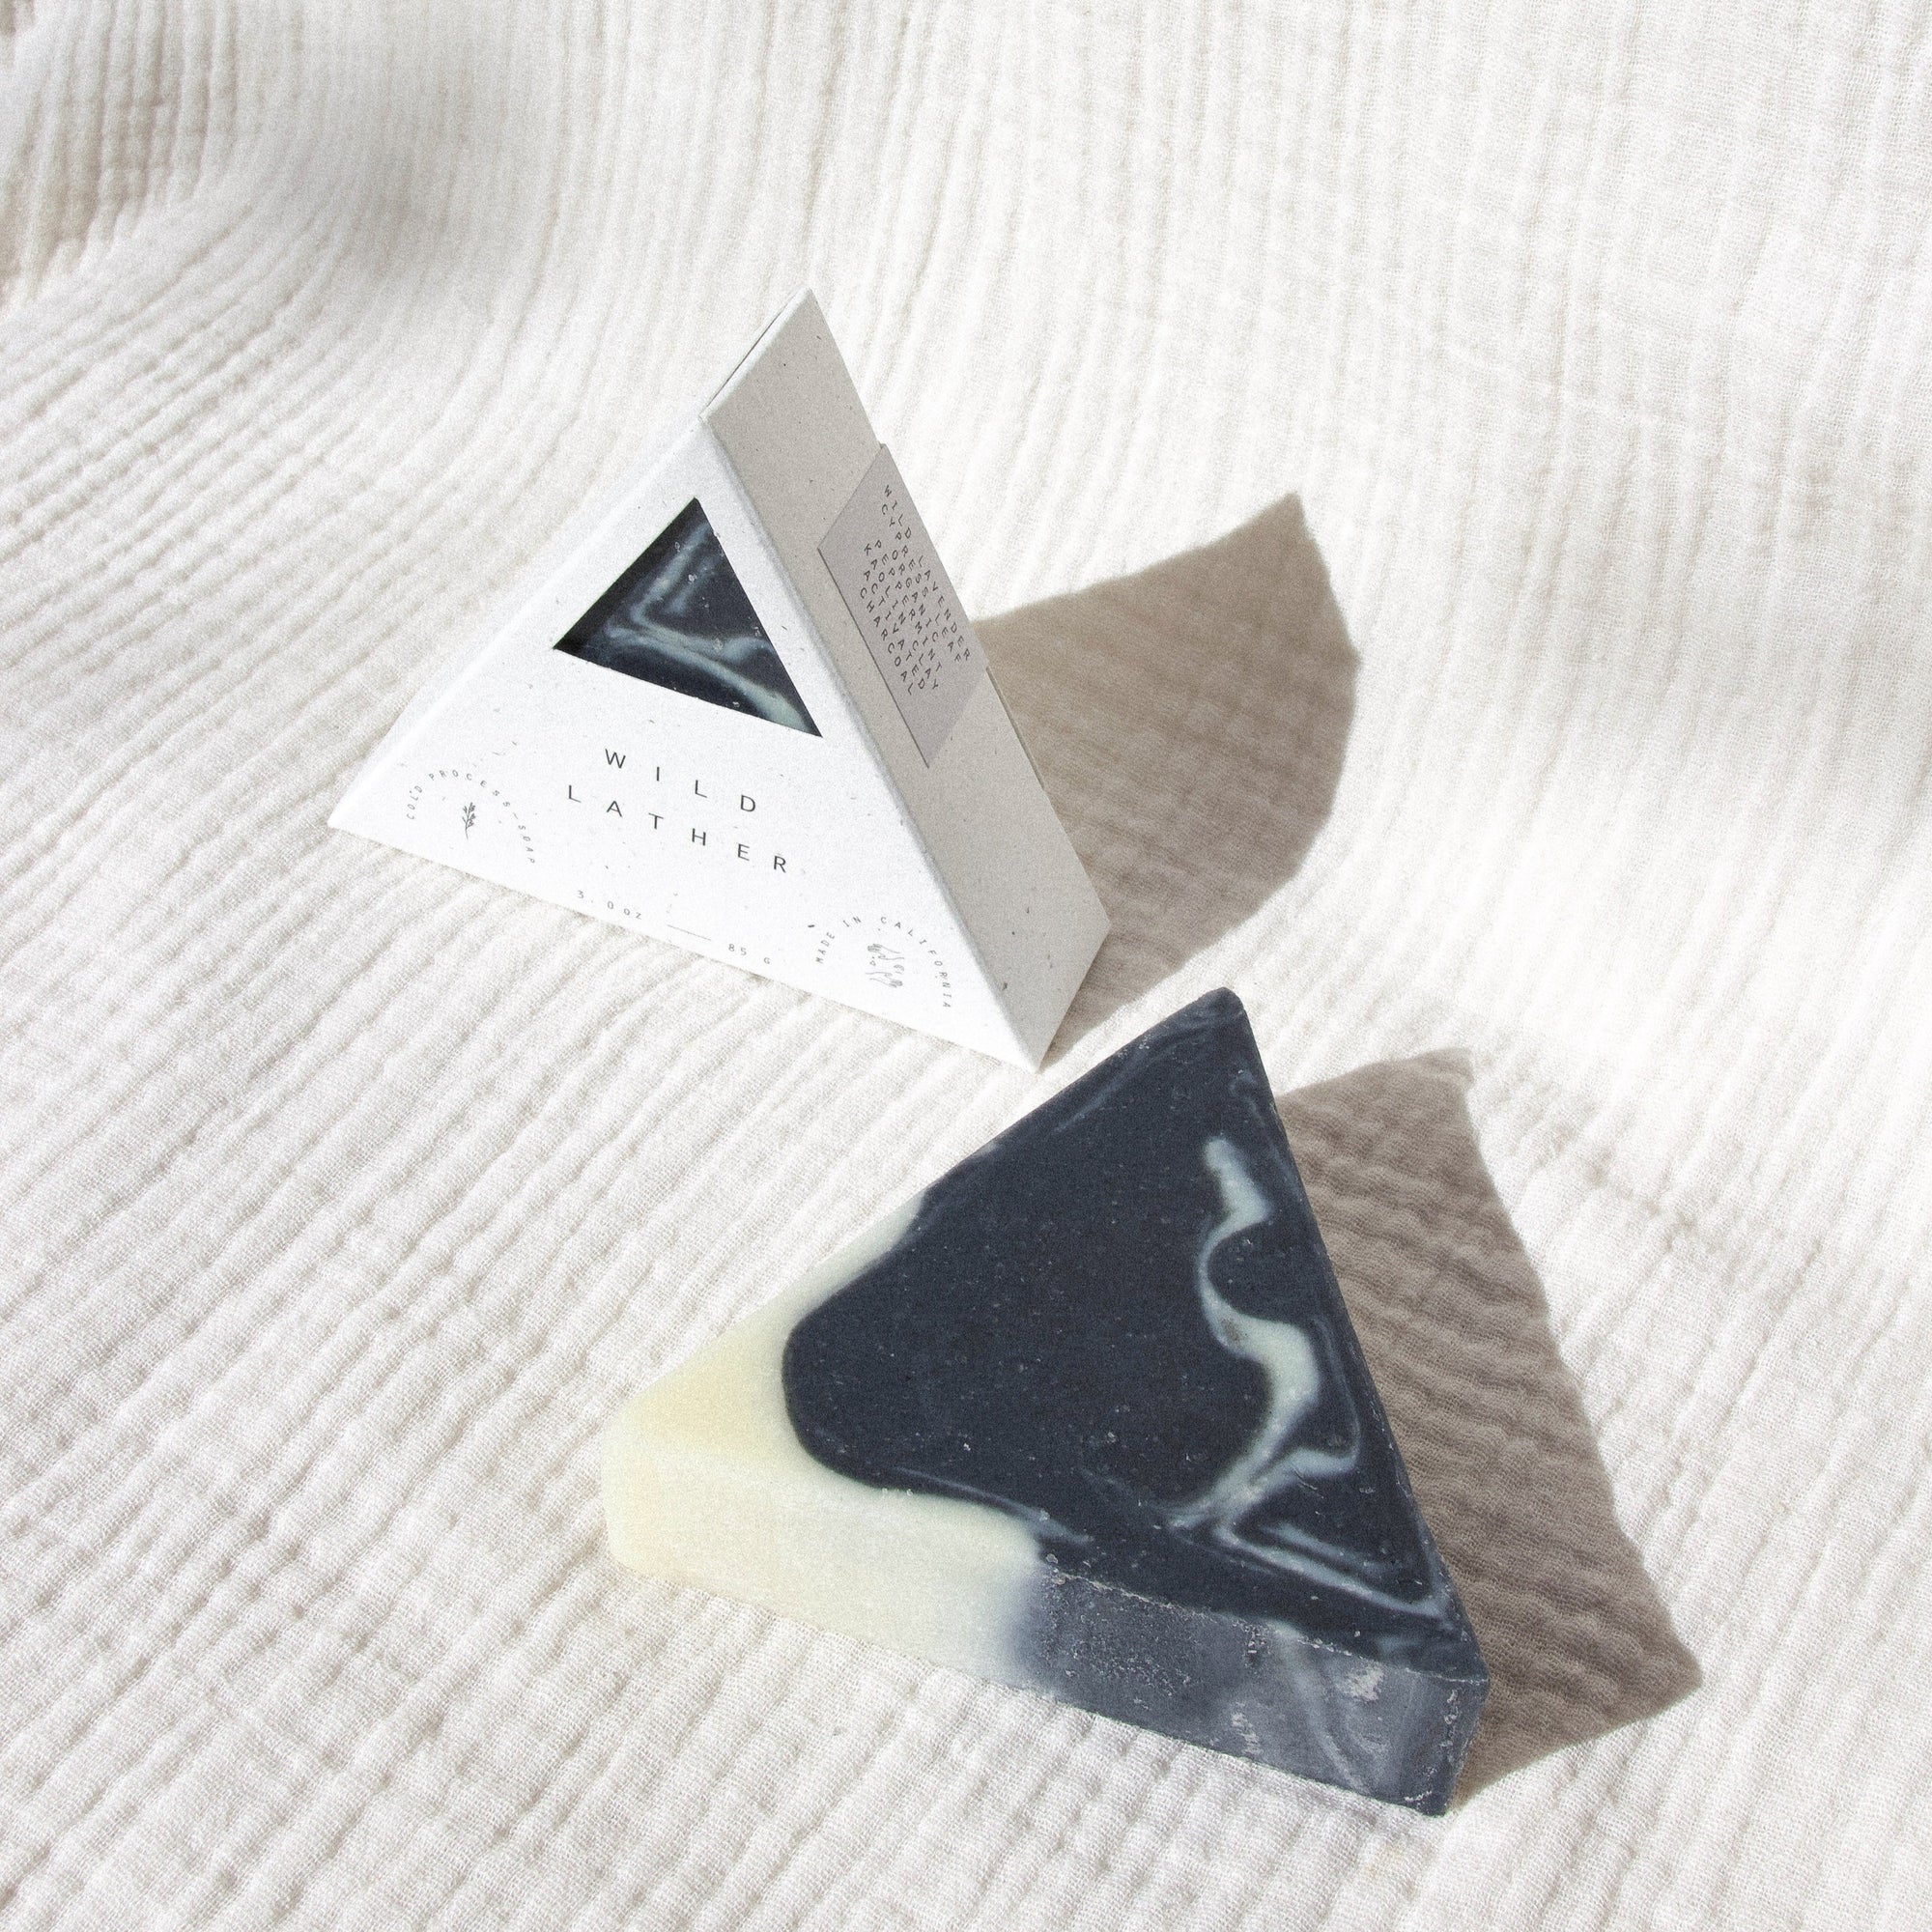 Activated charcoal triangle soap in speckled white triangle packaging against a textured white cloth